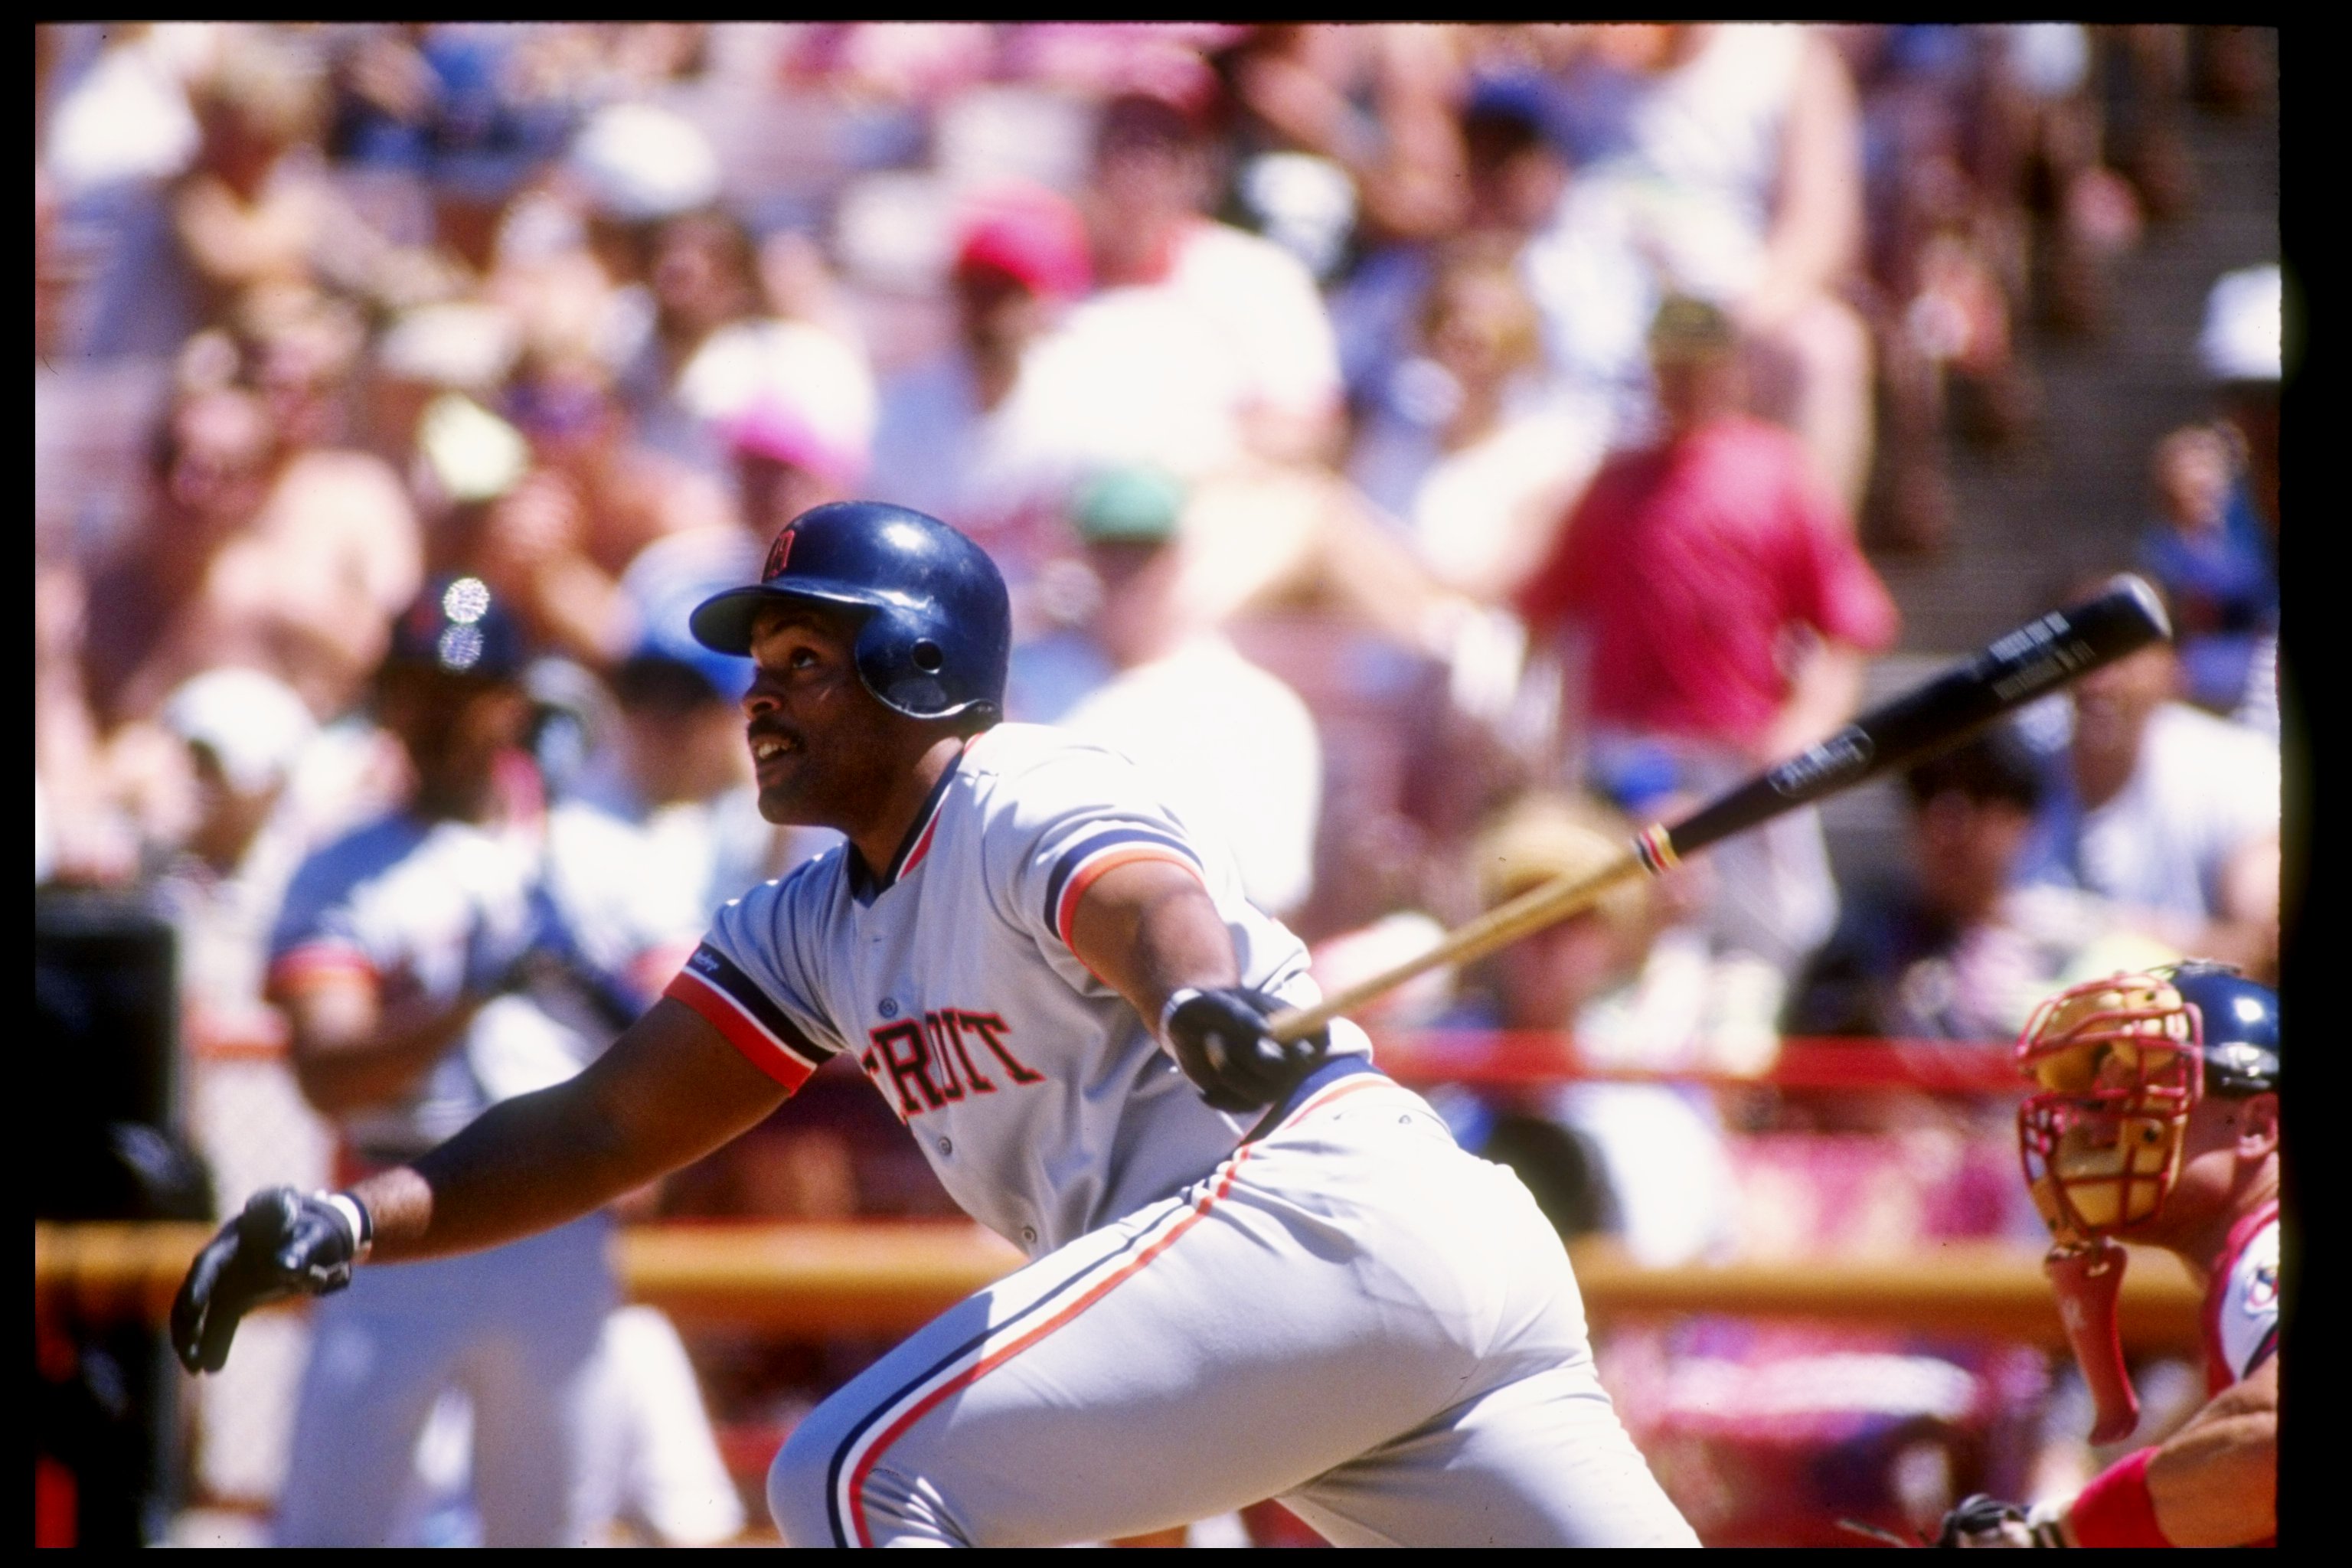 Cecil Fielder compares today's MLB to when he played 